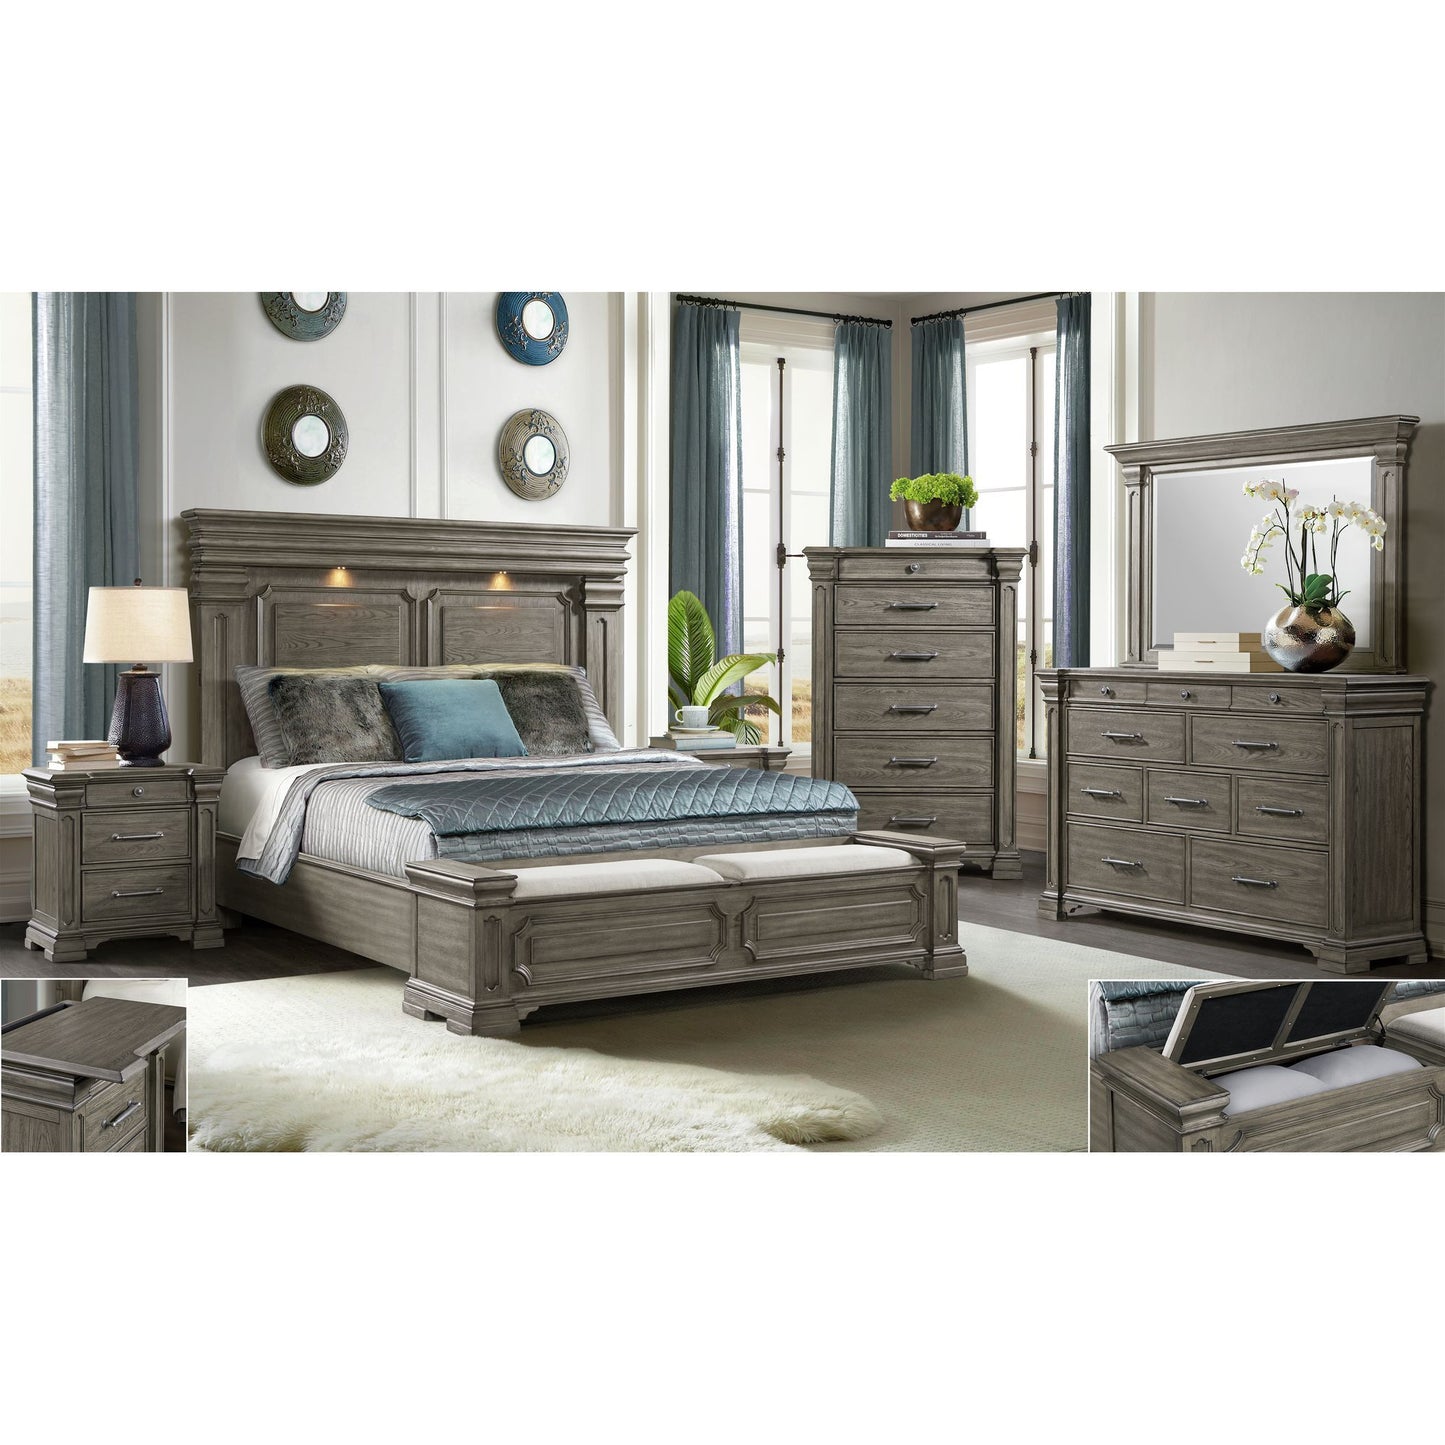 Kings Court - Storage Bed